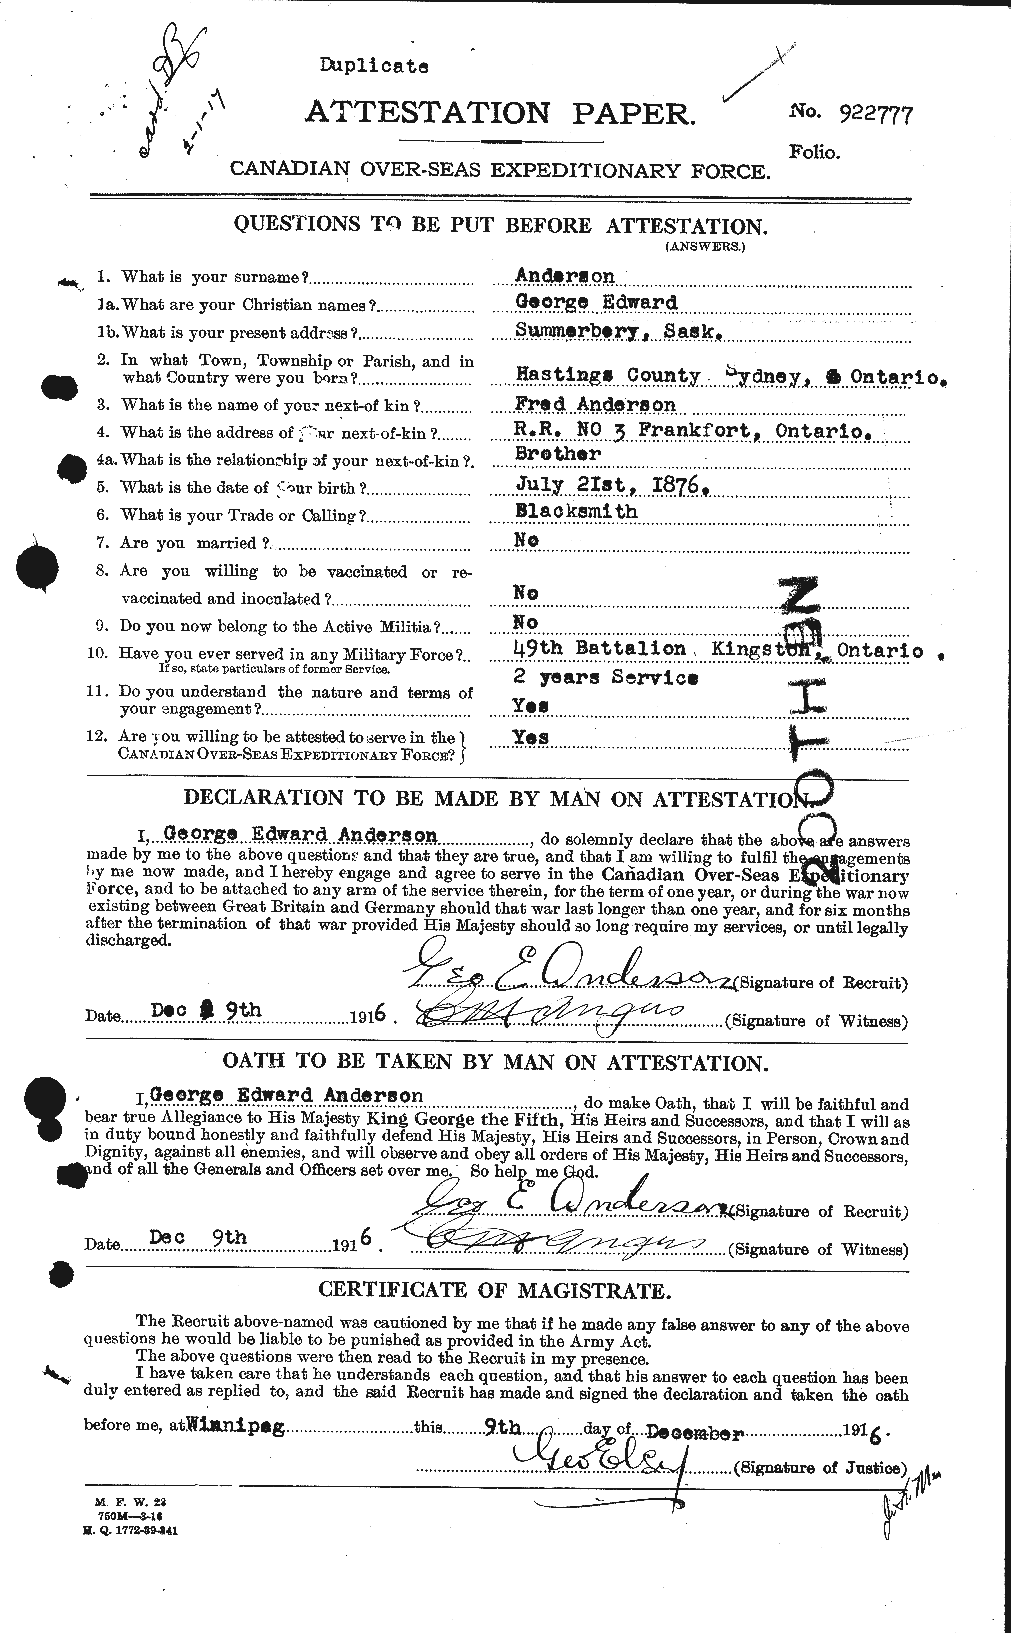 Personnel Records of the First World War - CEF 209729a